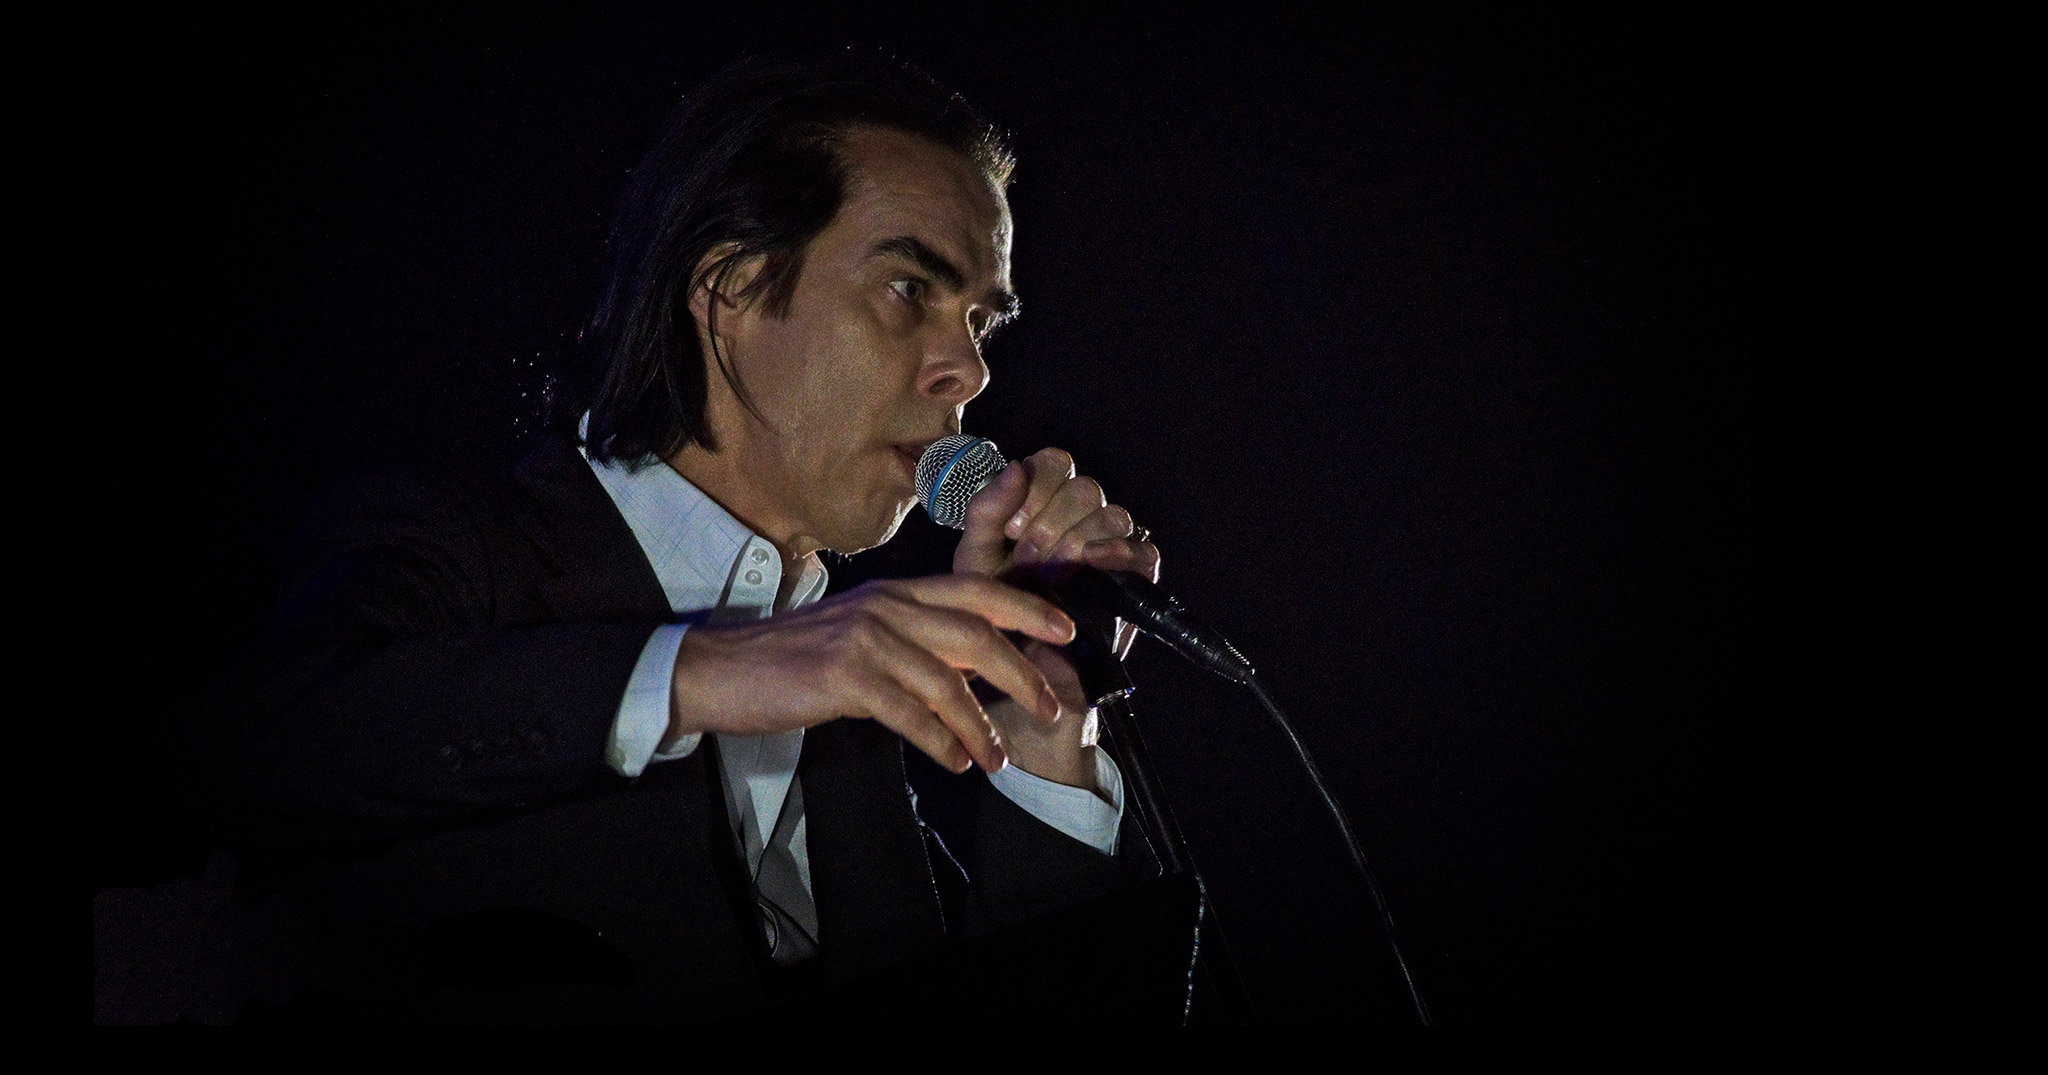 Concert Review: Nick Cave & The Bad Seeds, Auckland NZ, 2017